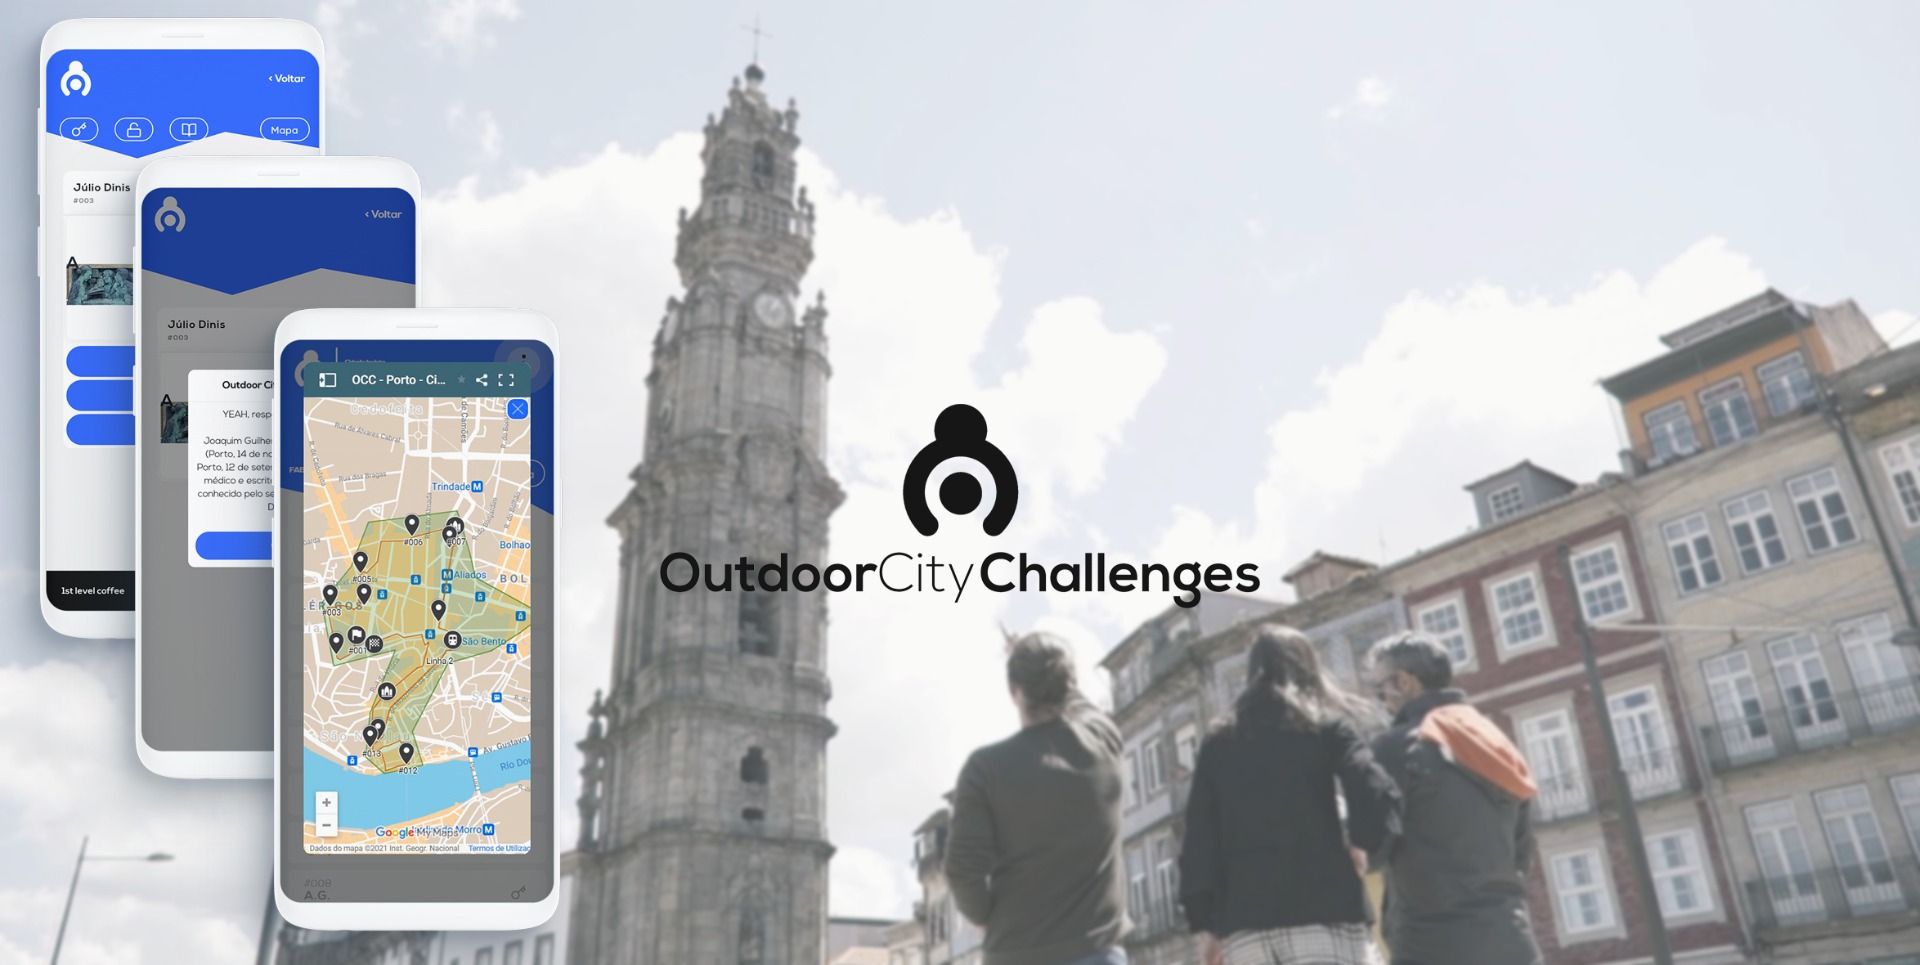  WHAT IS OUTDOOR CITY CHALLENGES